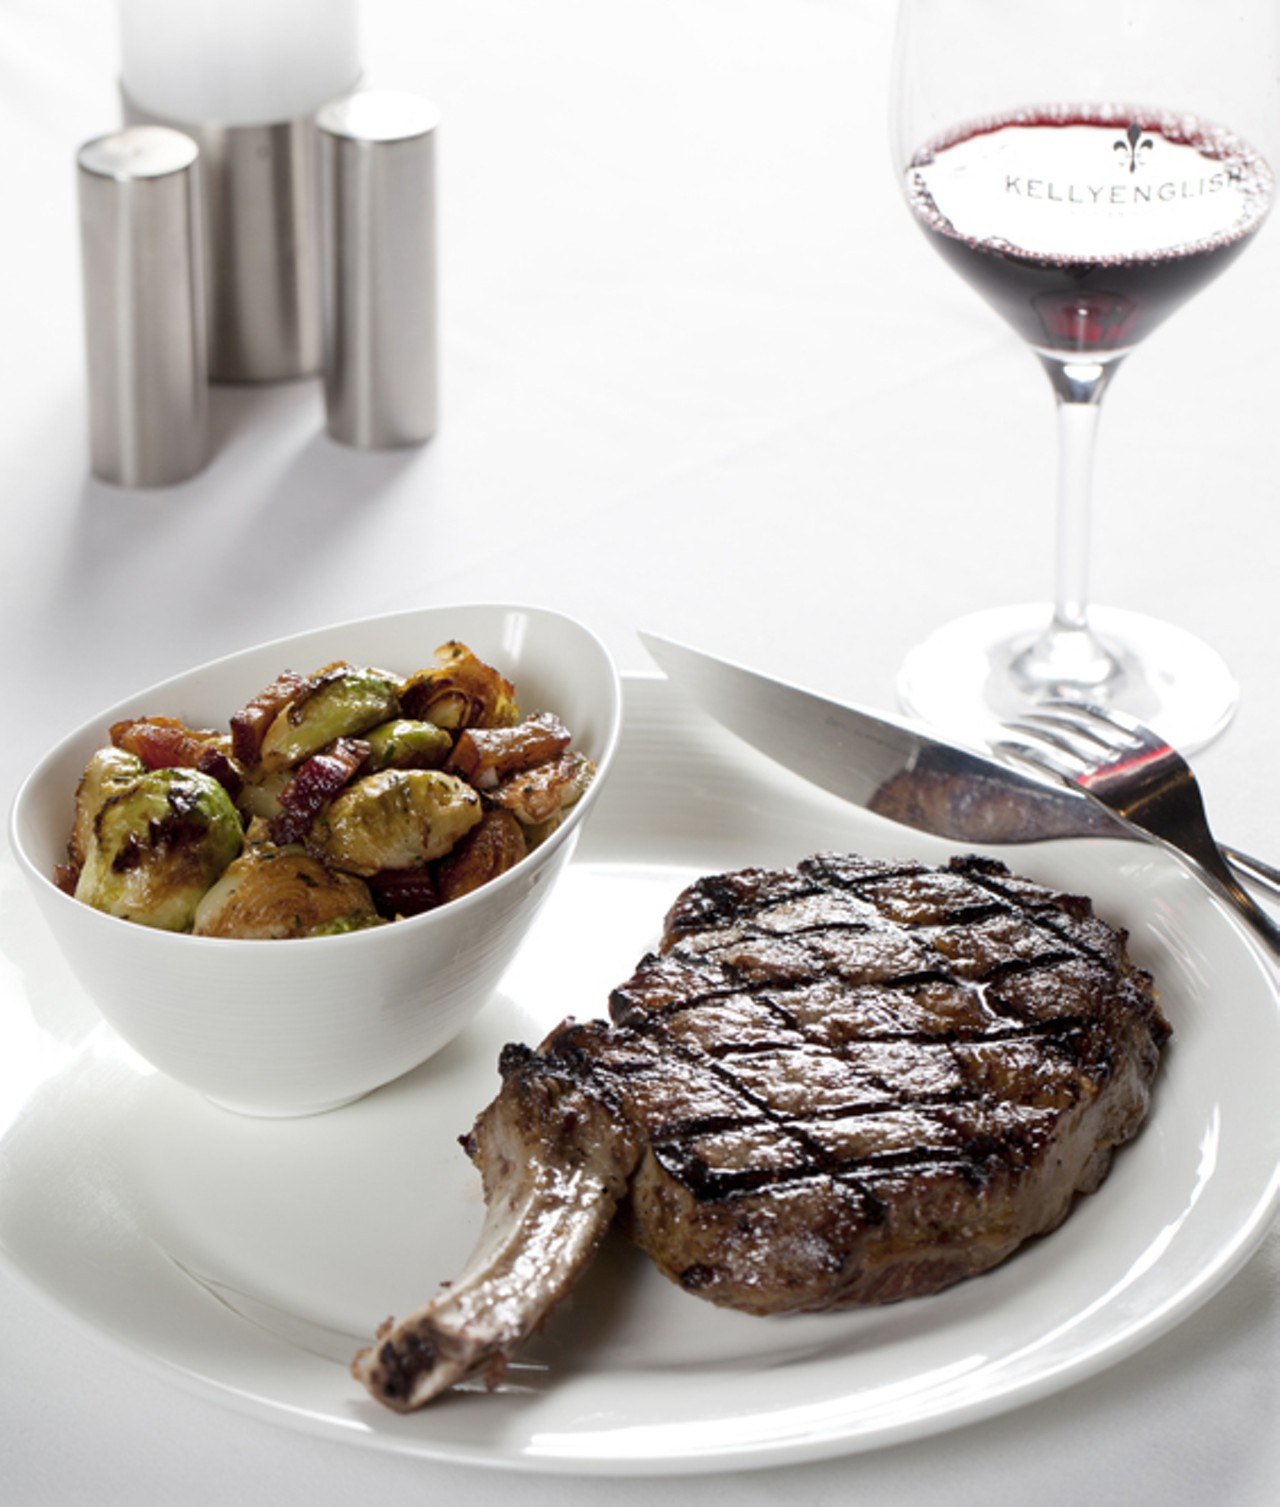 The 16 oz. bone-in ribeye with a side "salad" of brussels sprouts with Allan Benton's bacon and sherry.